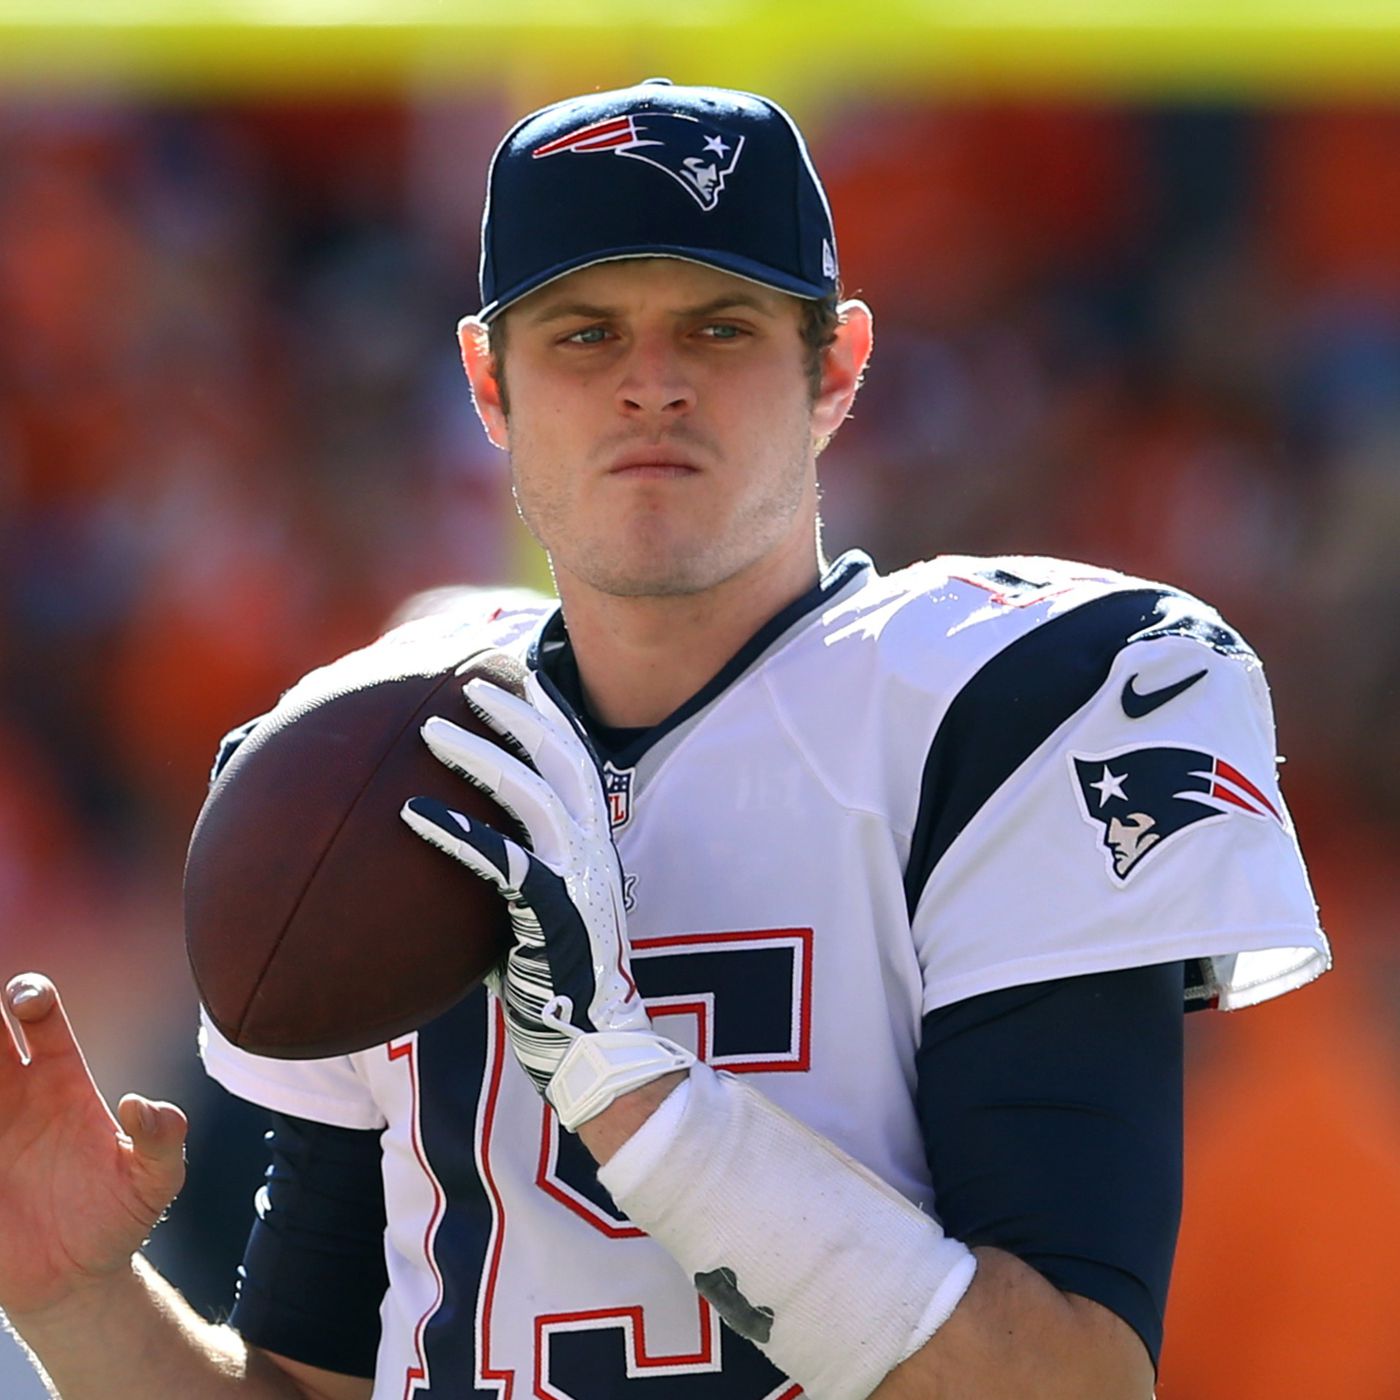 Learn more about Ryan Mallett's relationships, age, net worth and more...